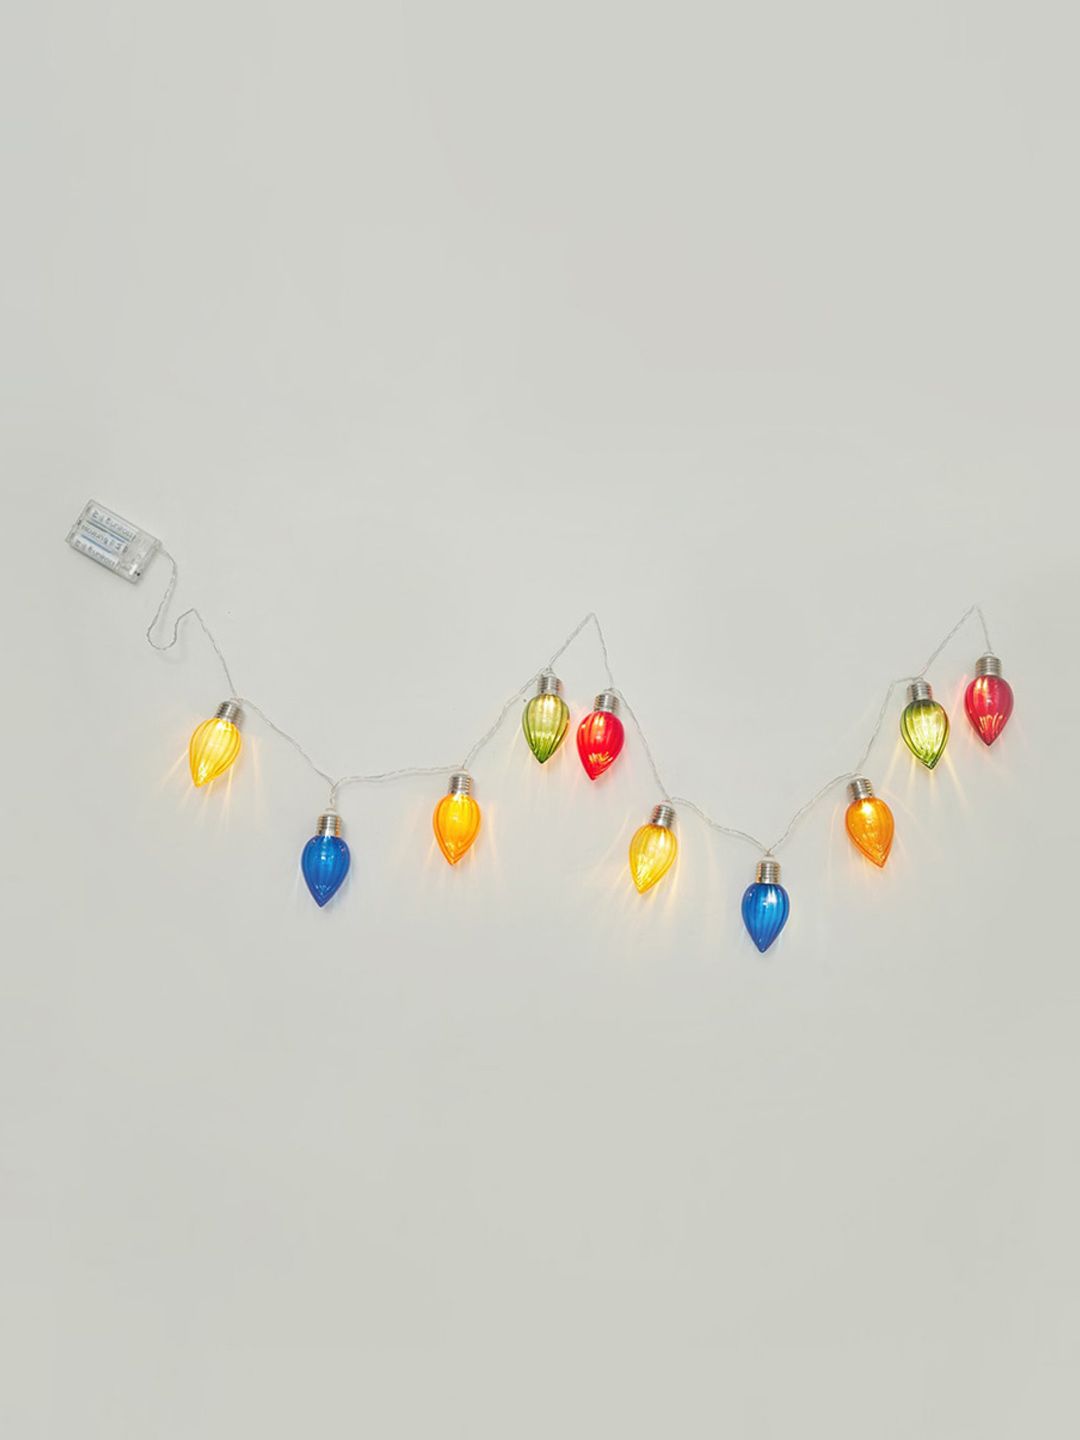 Home Centre Multicoloured LED String Light Price in India